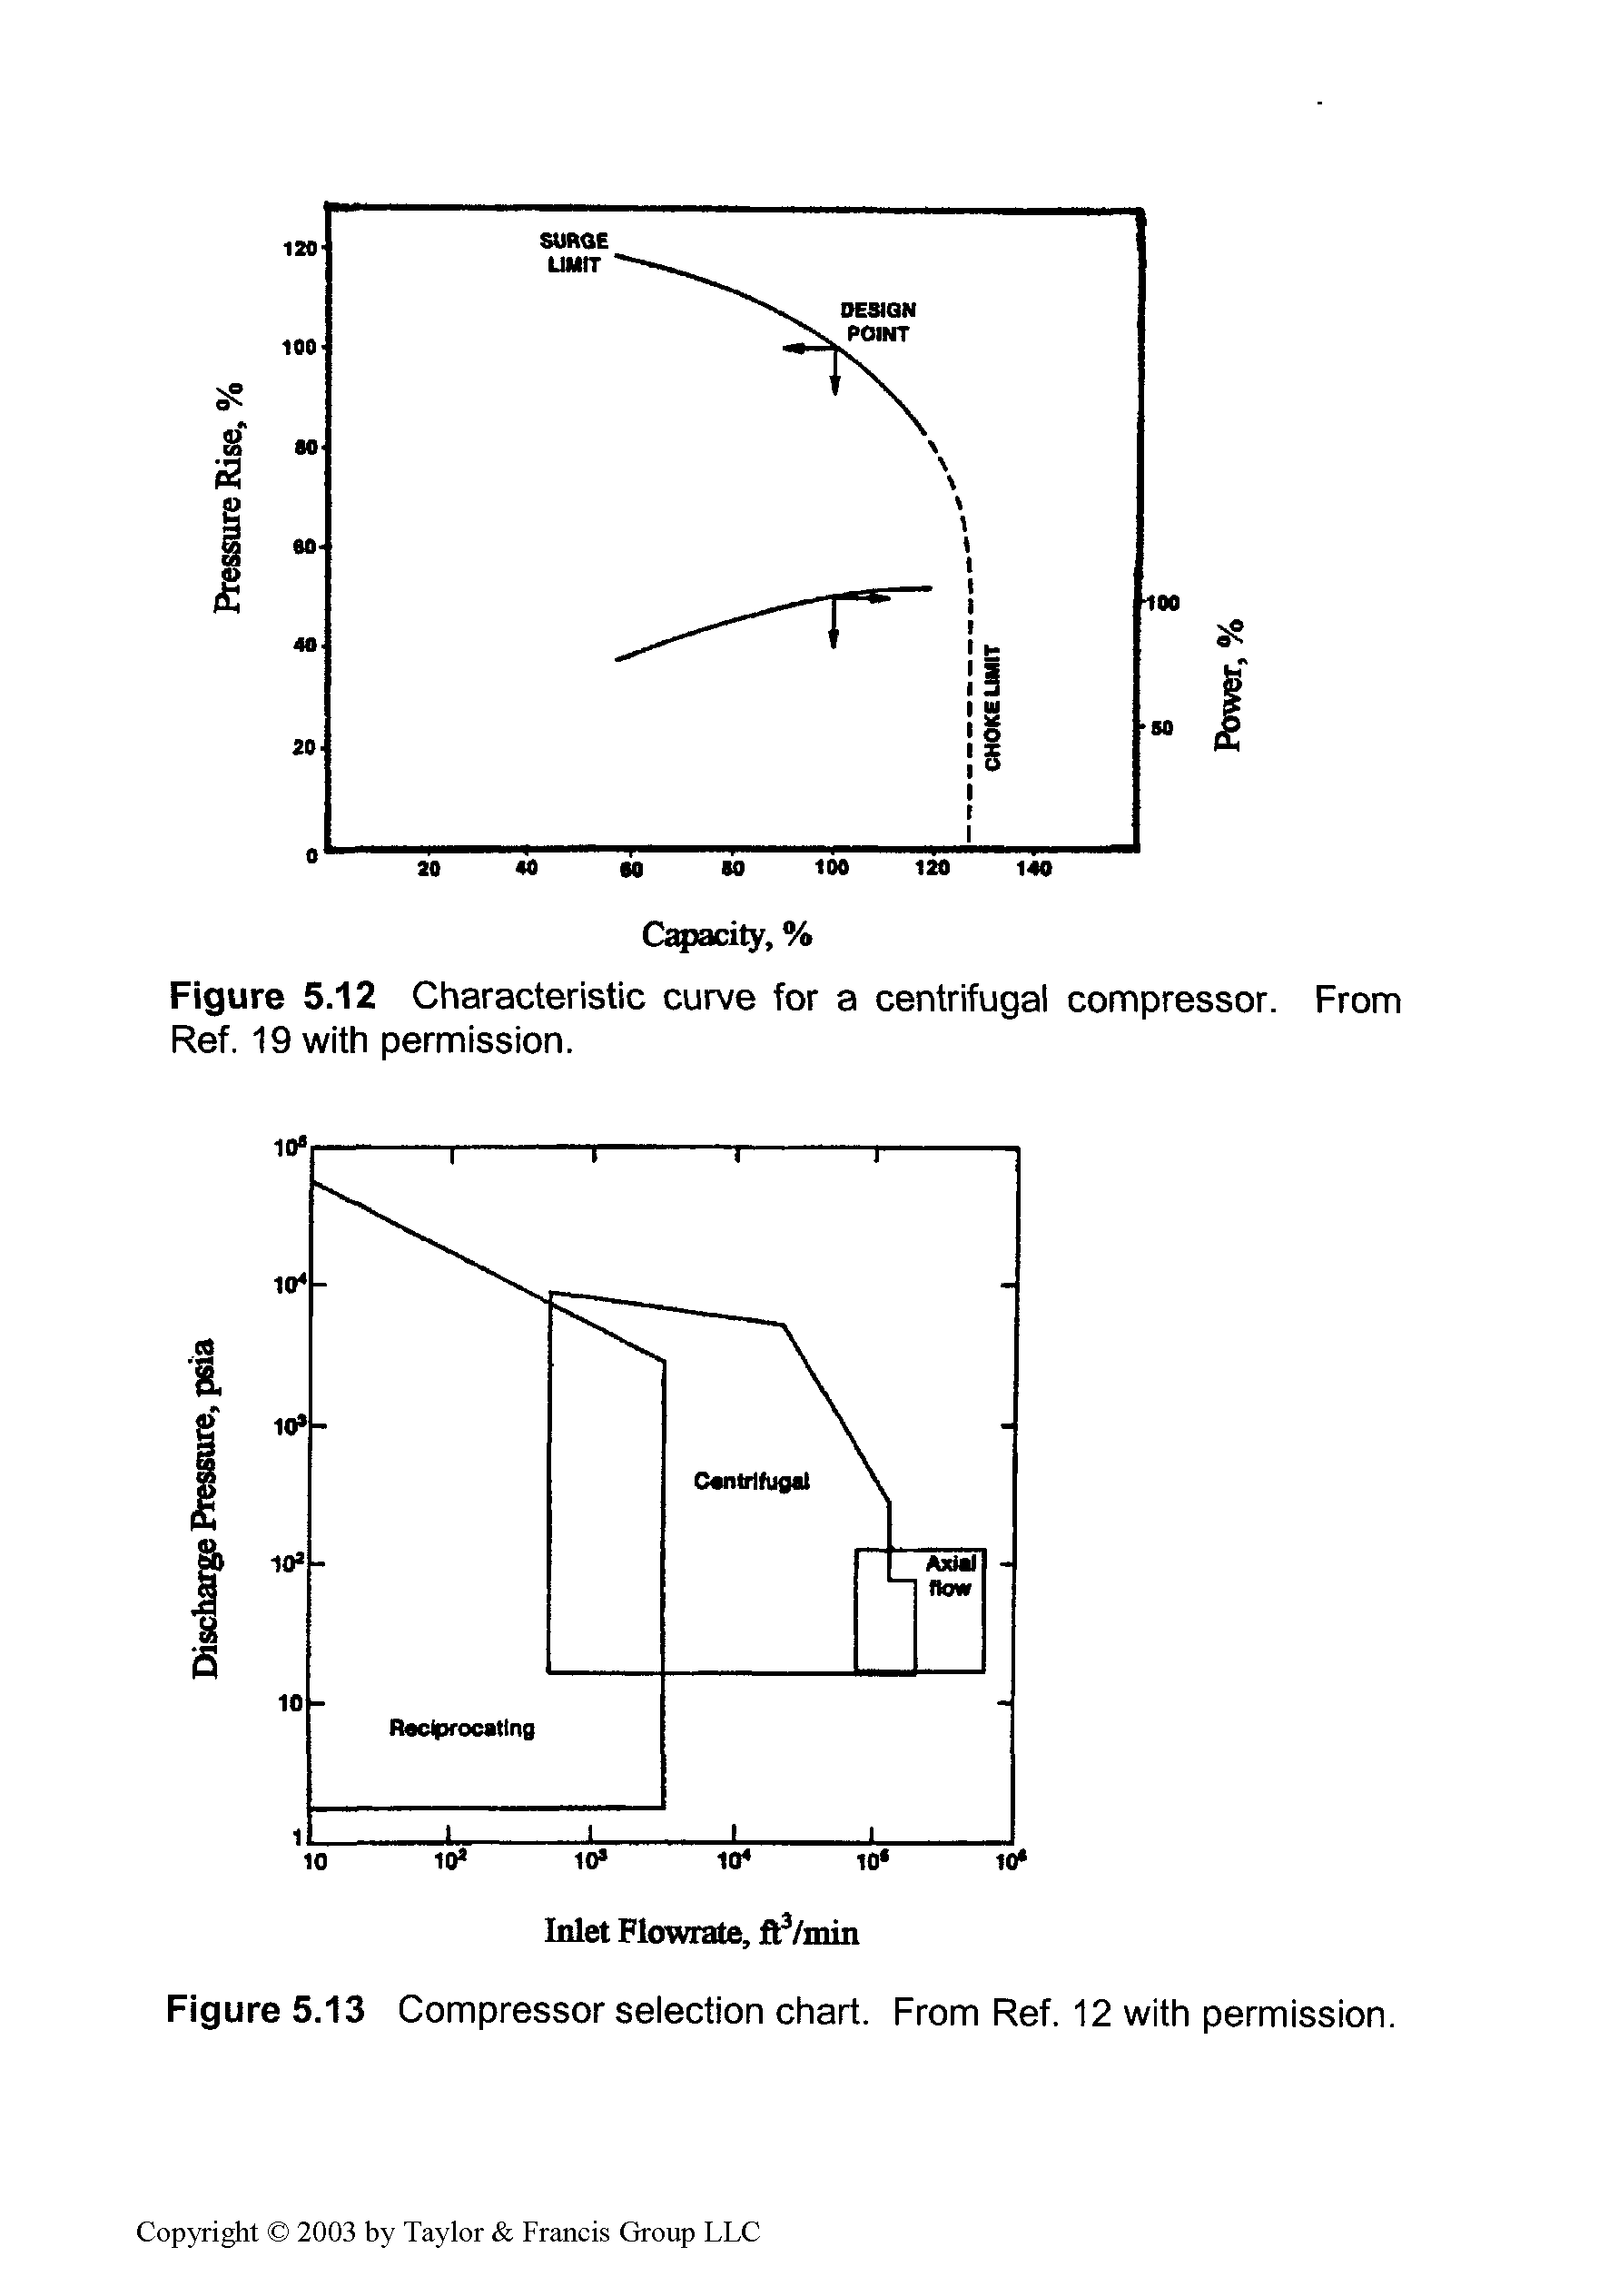 Figure 5.12 Characteristic curve for a centrifugal compressor. From Ref. 19 with permission.